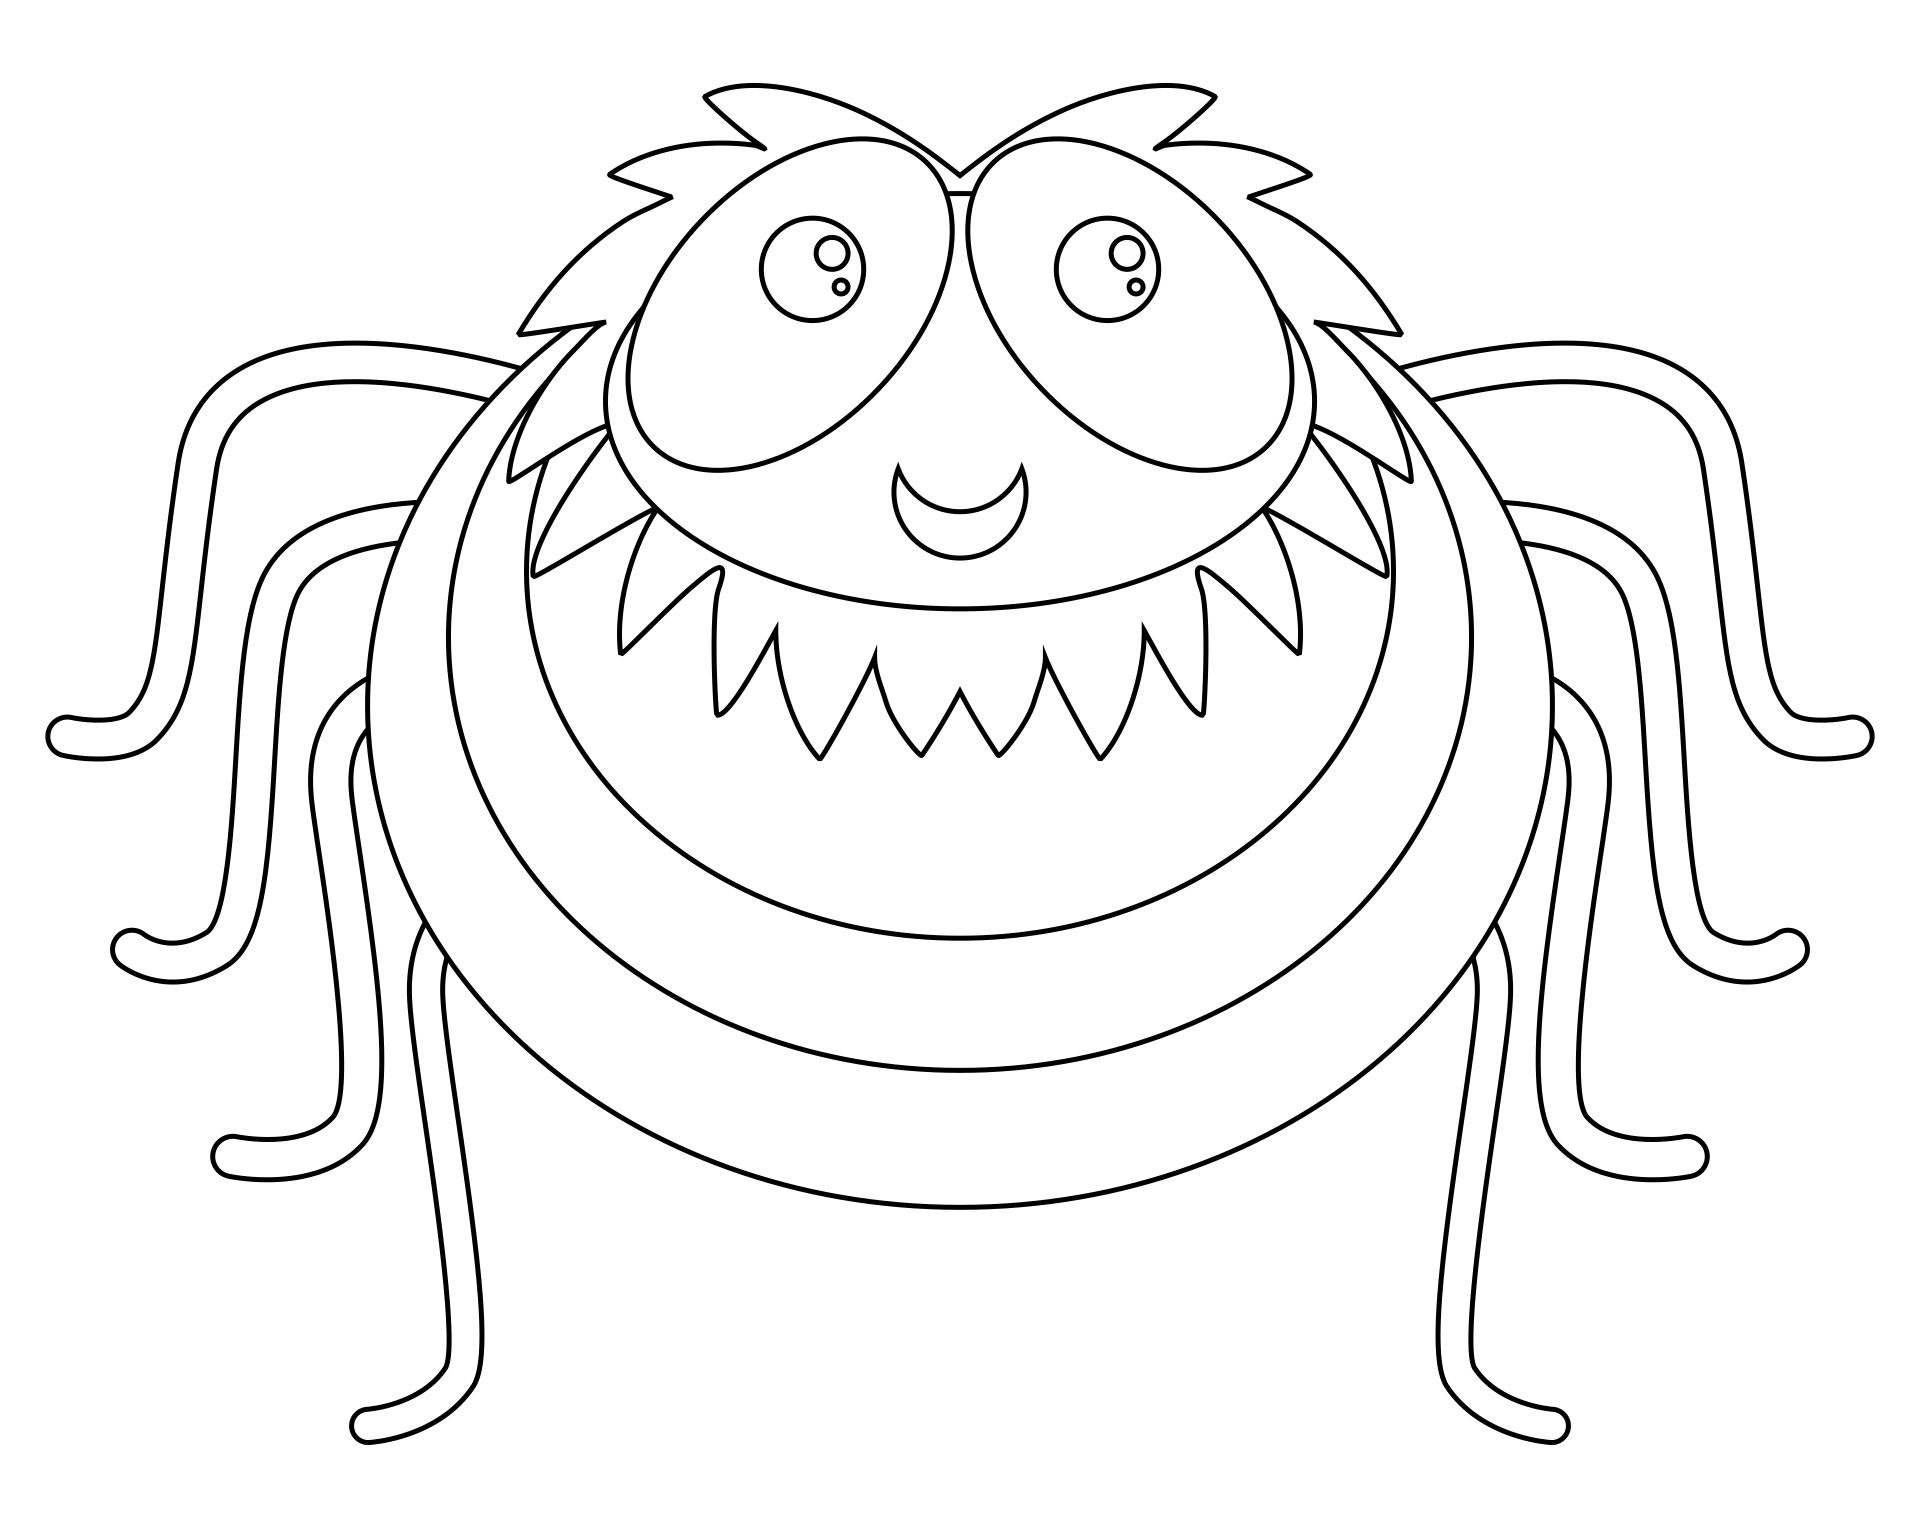 Angry Spider Coloring Page Netart | My XXX Hot Girl